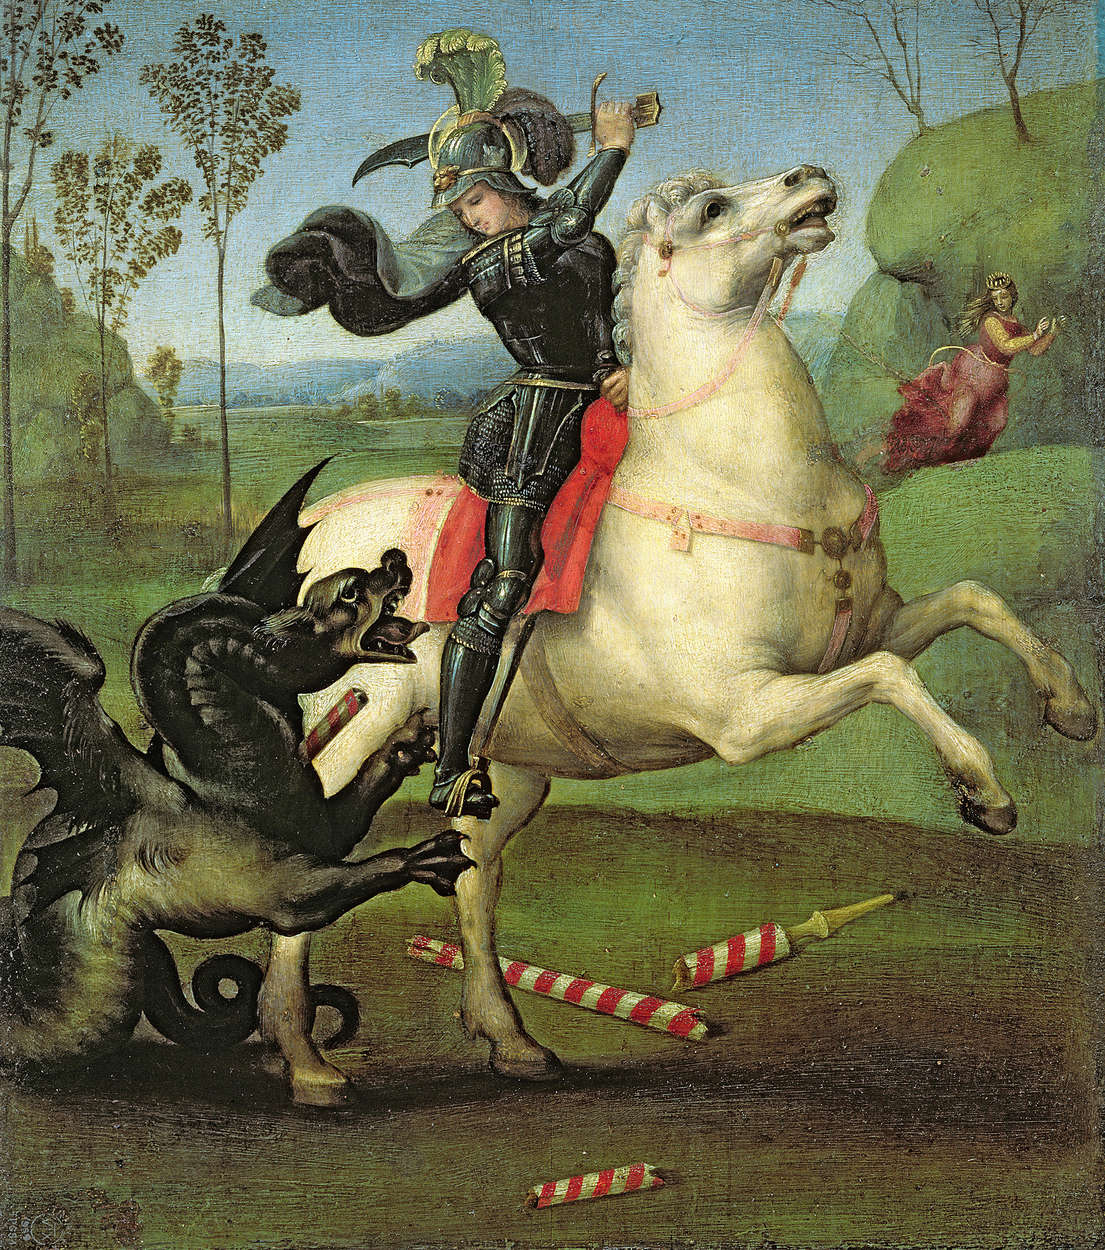             Photo wallpaper "St. George in battle with the dragonum" by Raphael
        